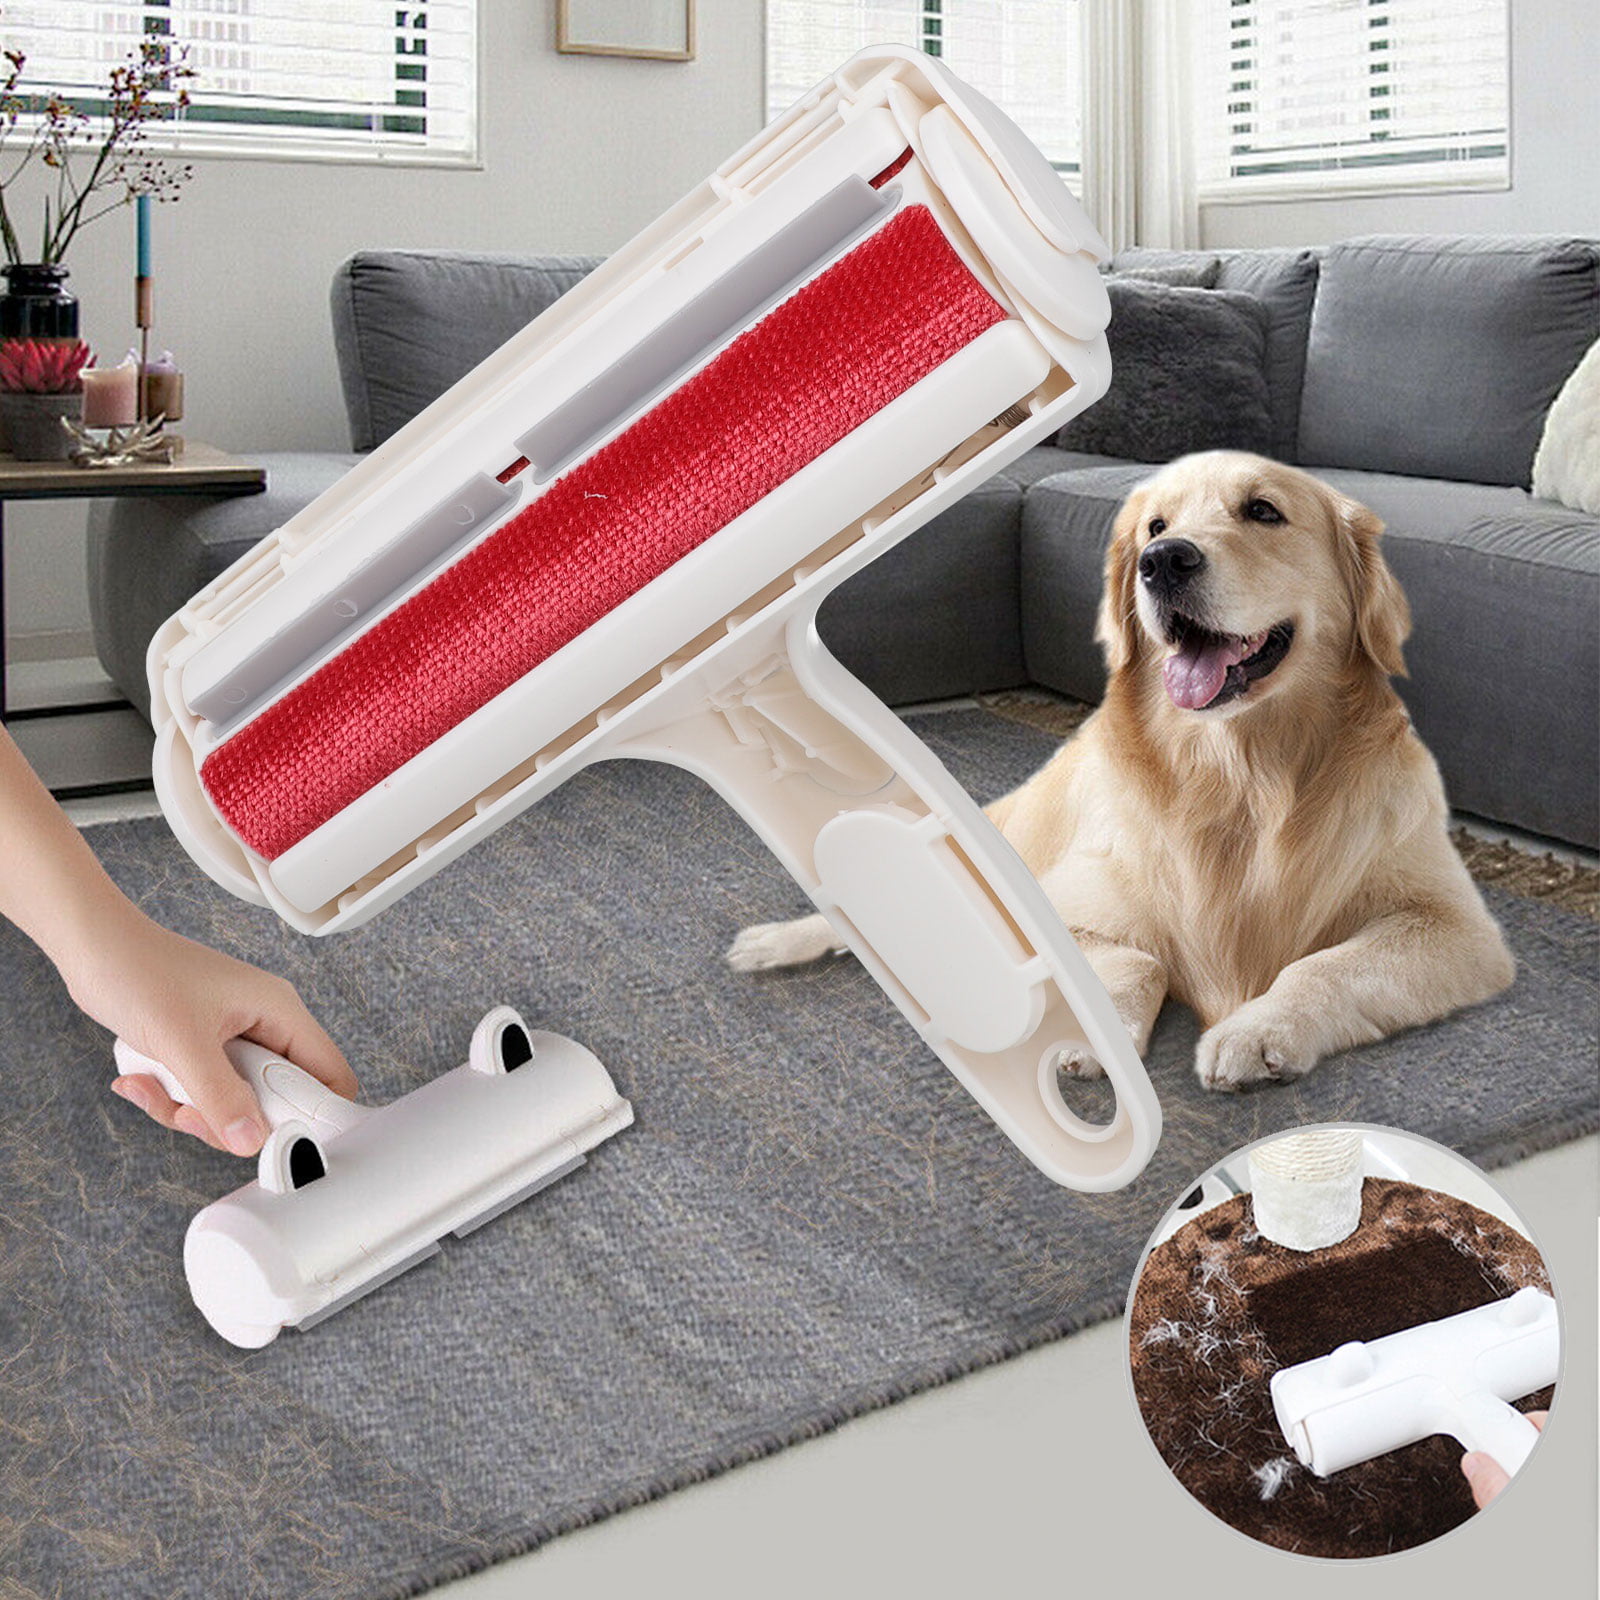 Pet Hair Remover Sofa Clothes Lint Cleaning Brush Dog Cat Fur Roller Reusable US 